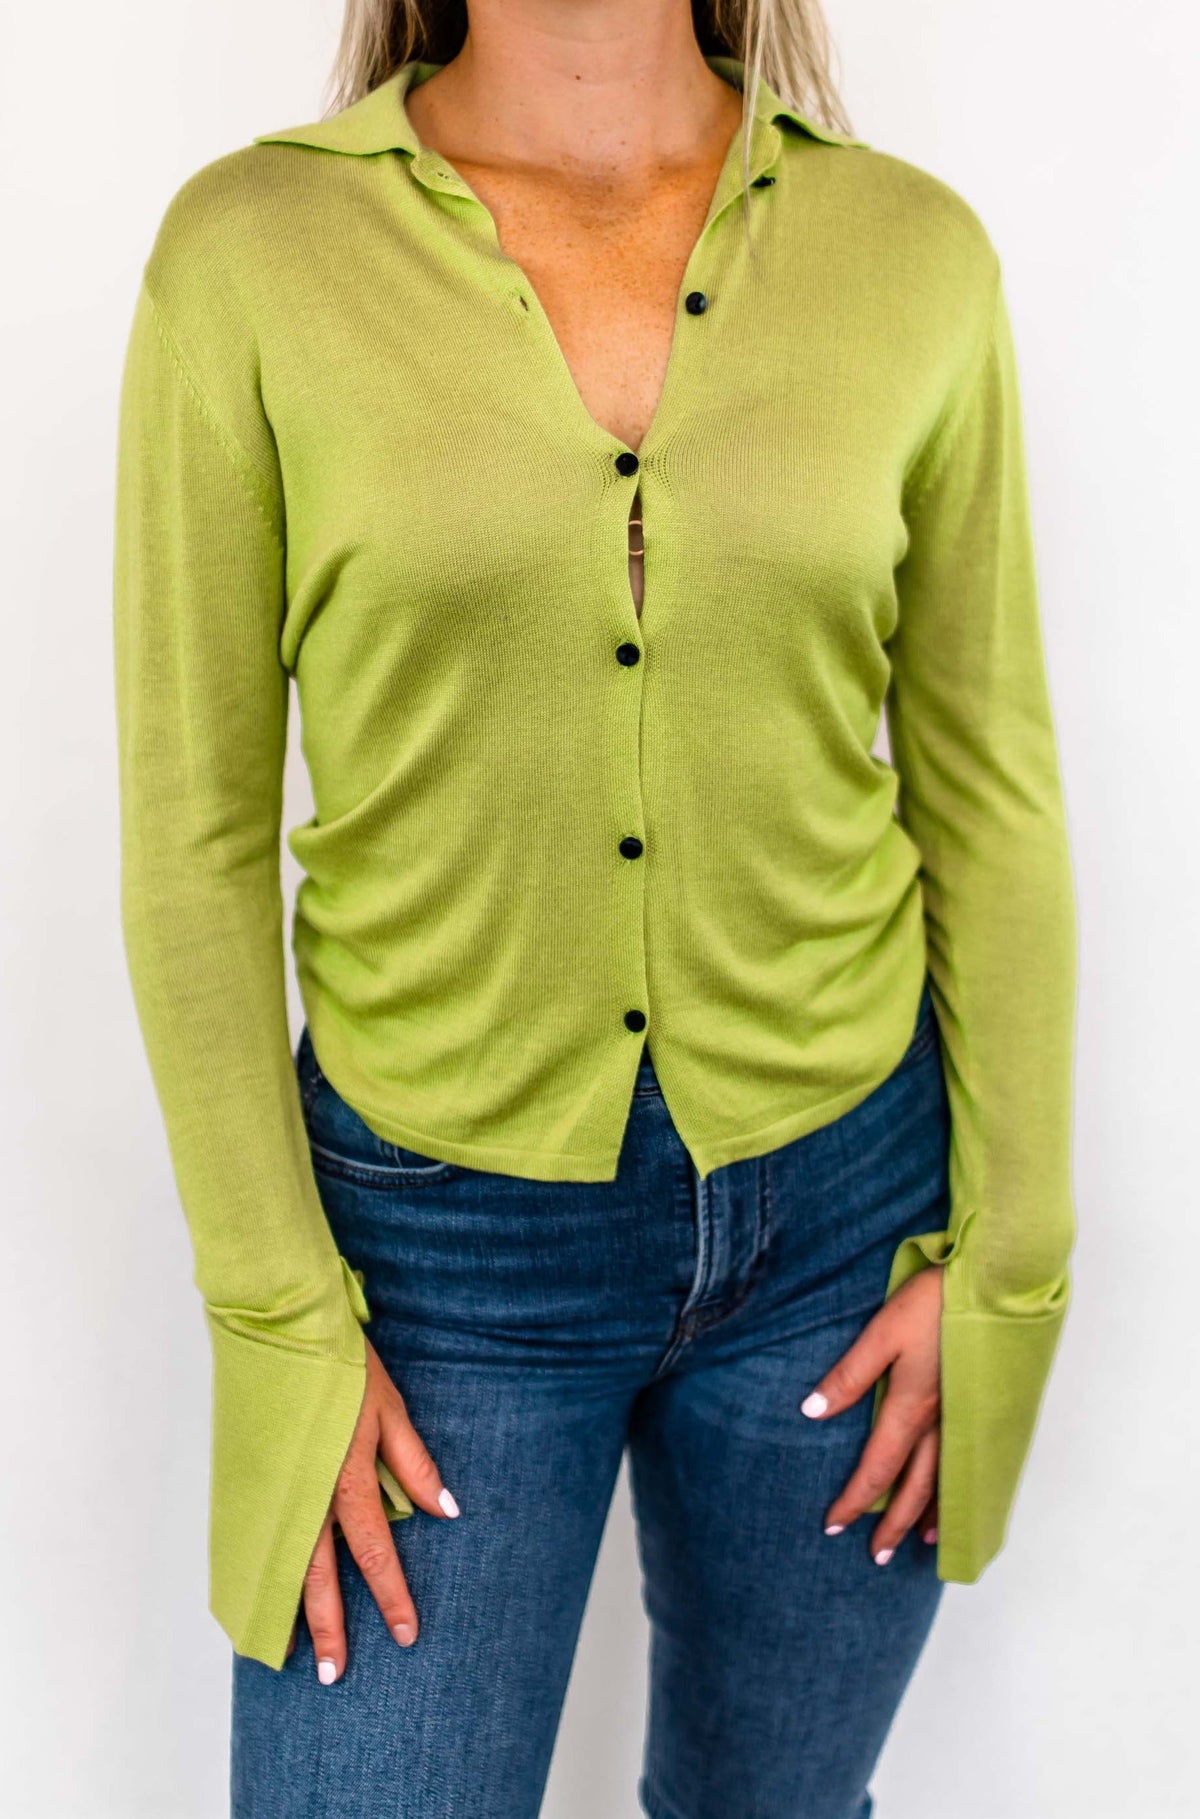 Spencer Knit Top in Green (2)